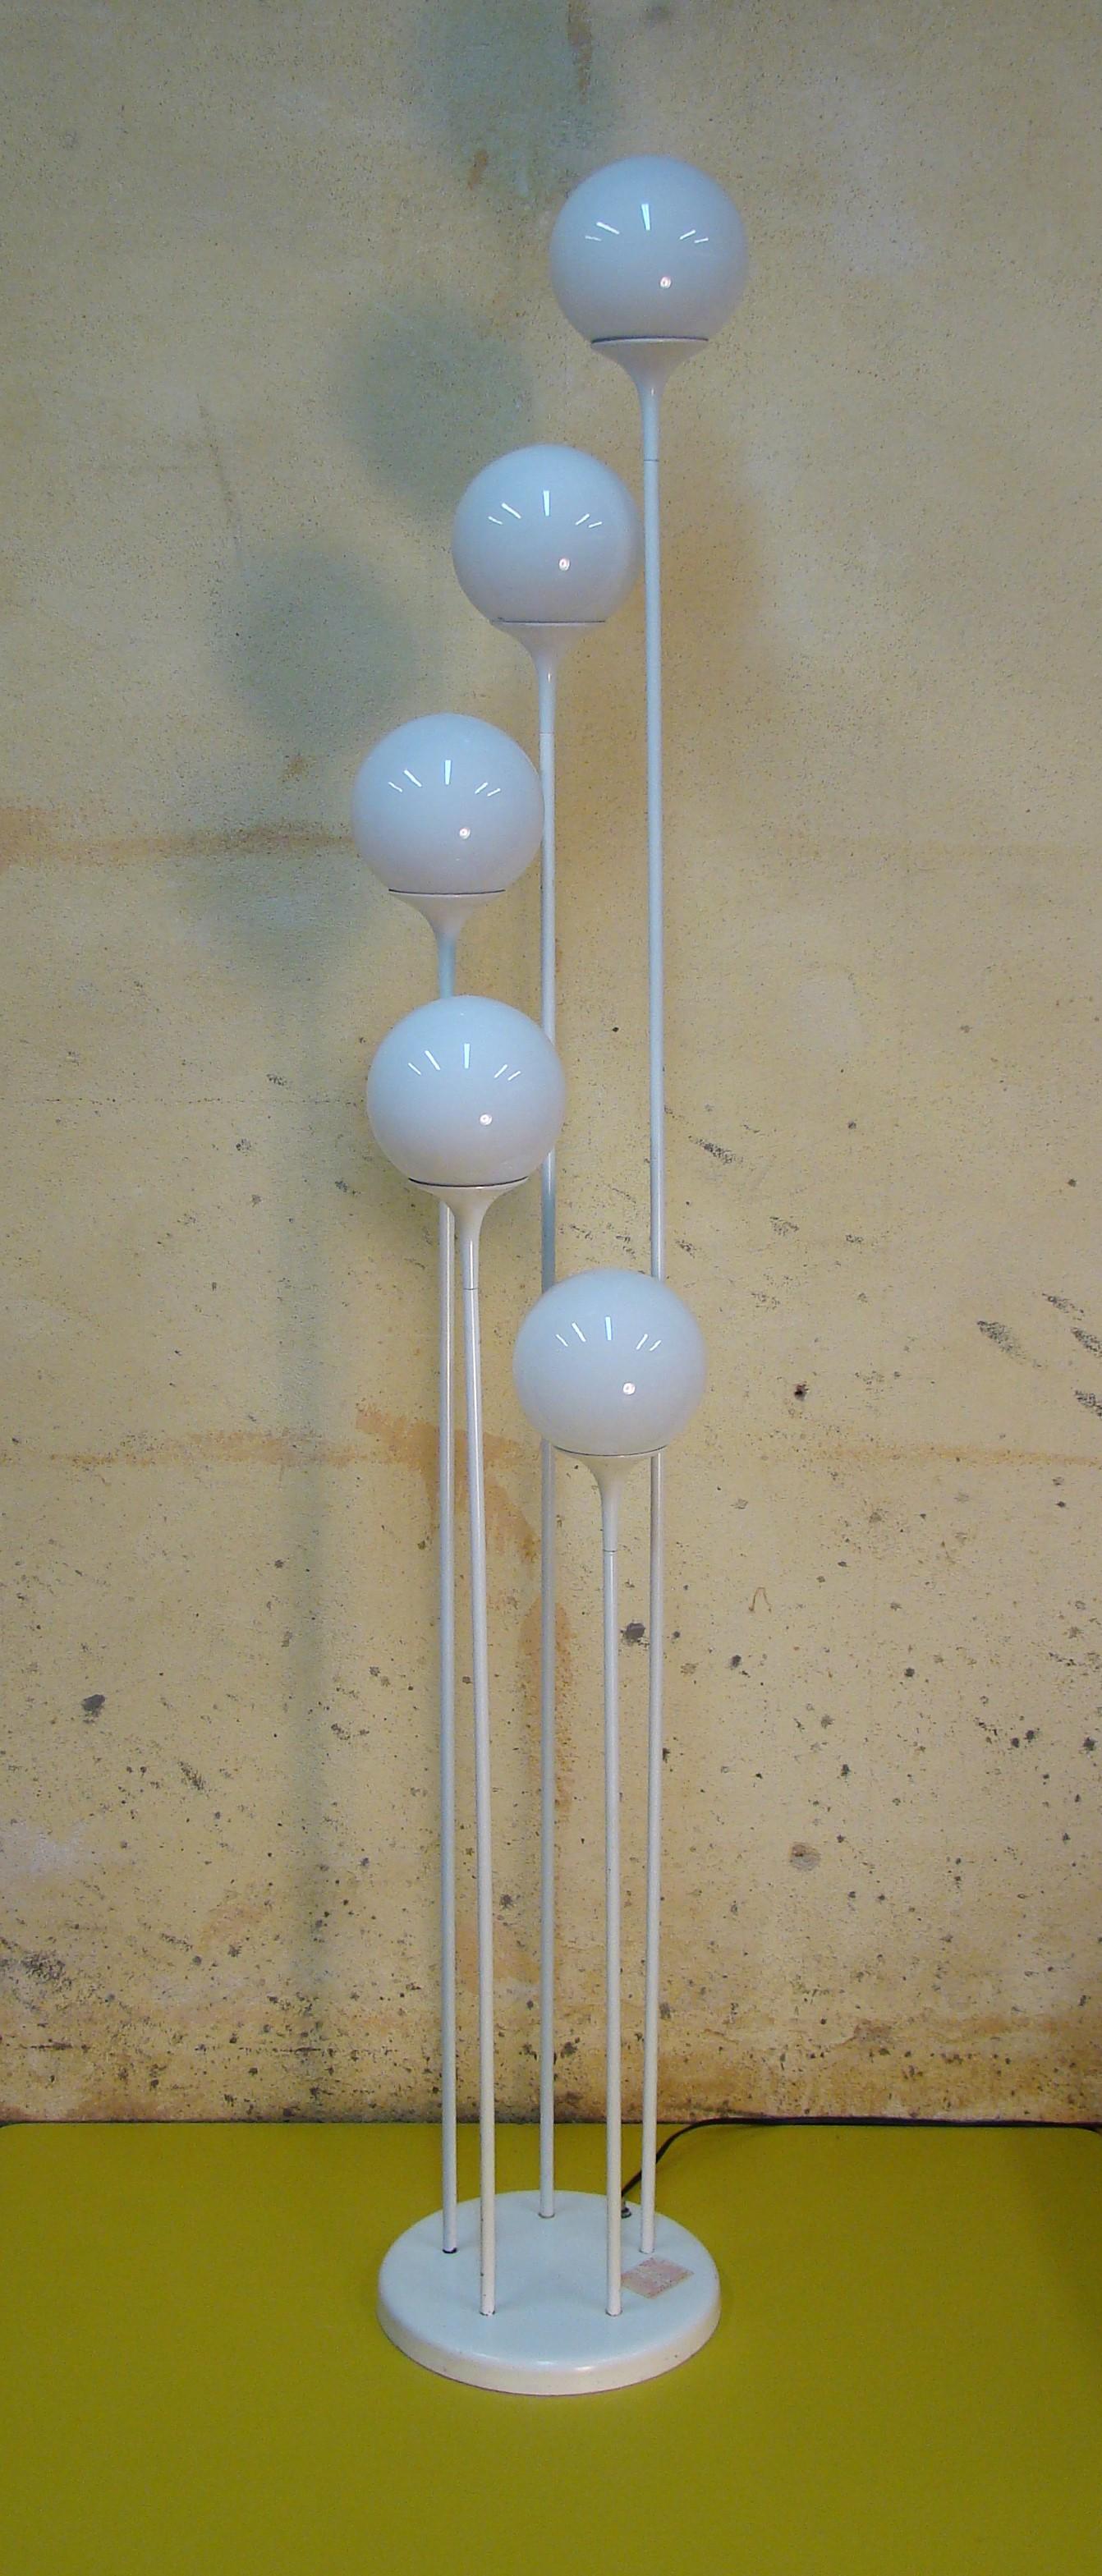 An uncommon white enameled floor lamp with five white glass globes on metal stems that mimic popular architectural themes of the period, namely Eero Saarinens 